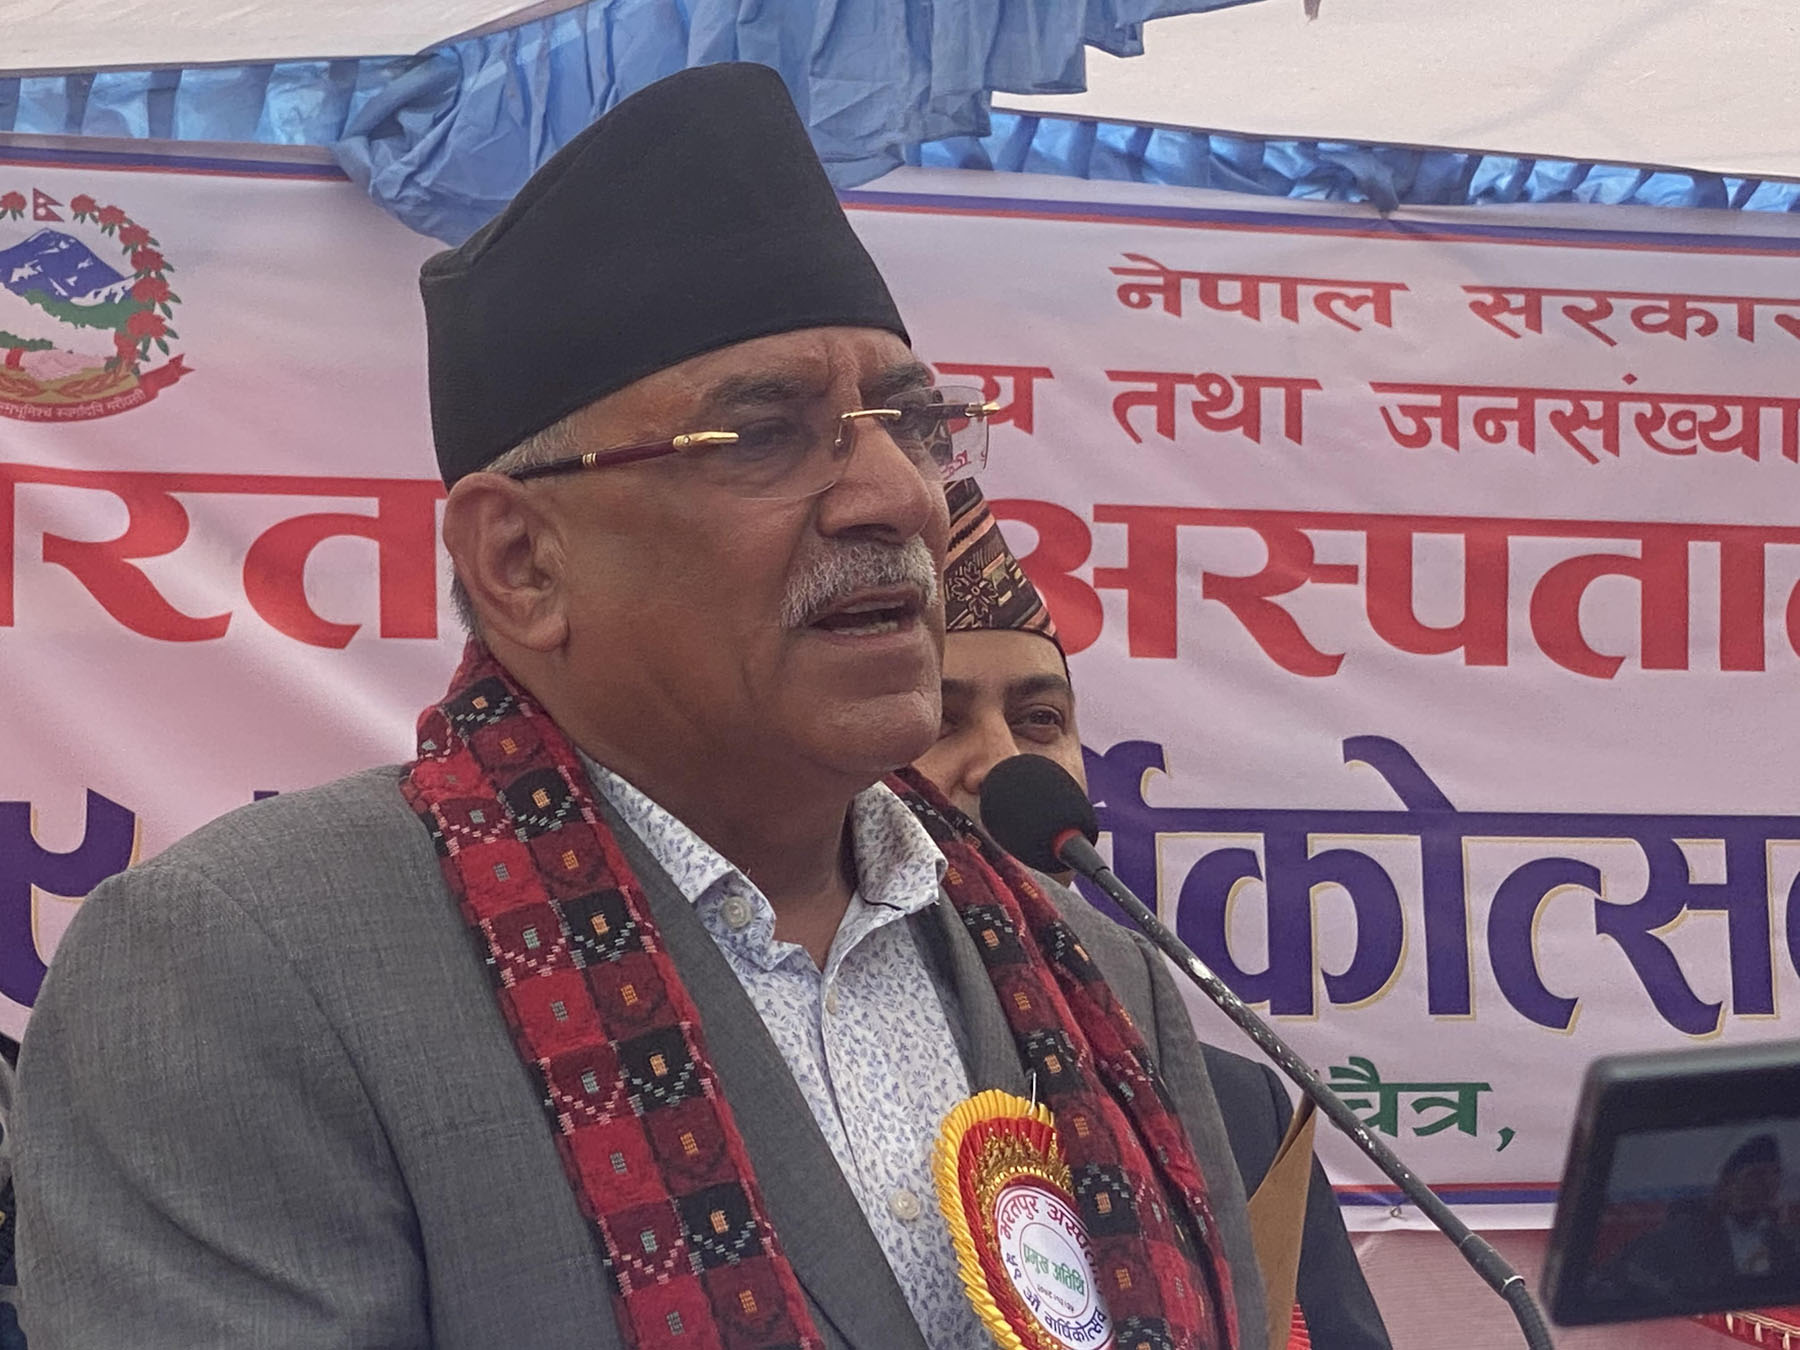 bharatpur-hospital-to-be-developed-a-medical-college-chair-prachanda